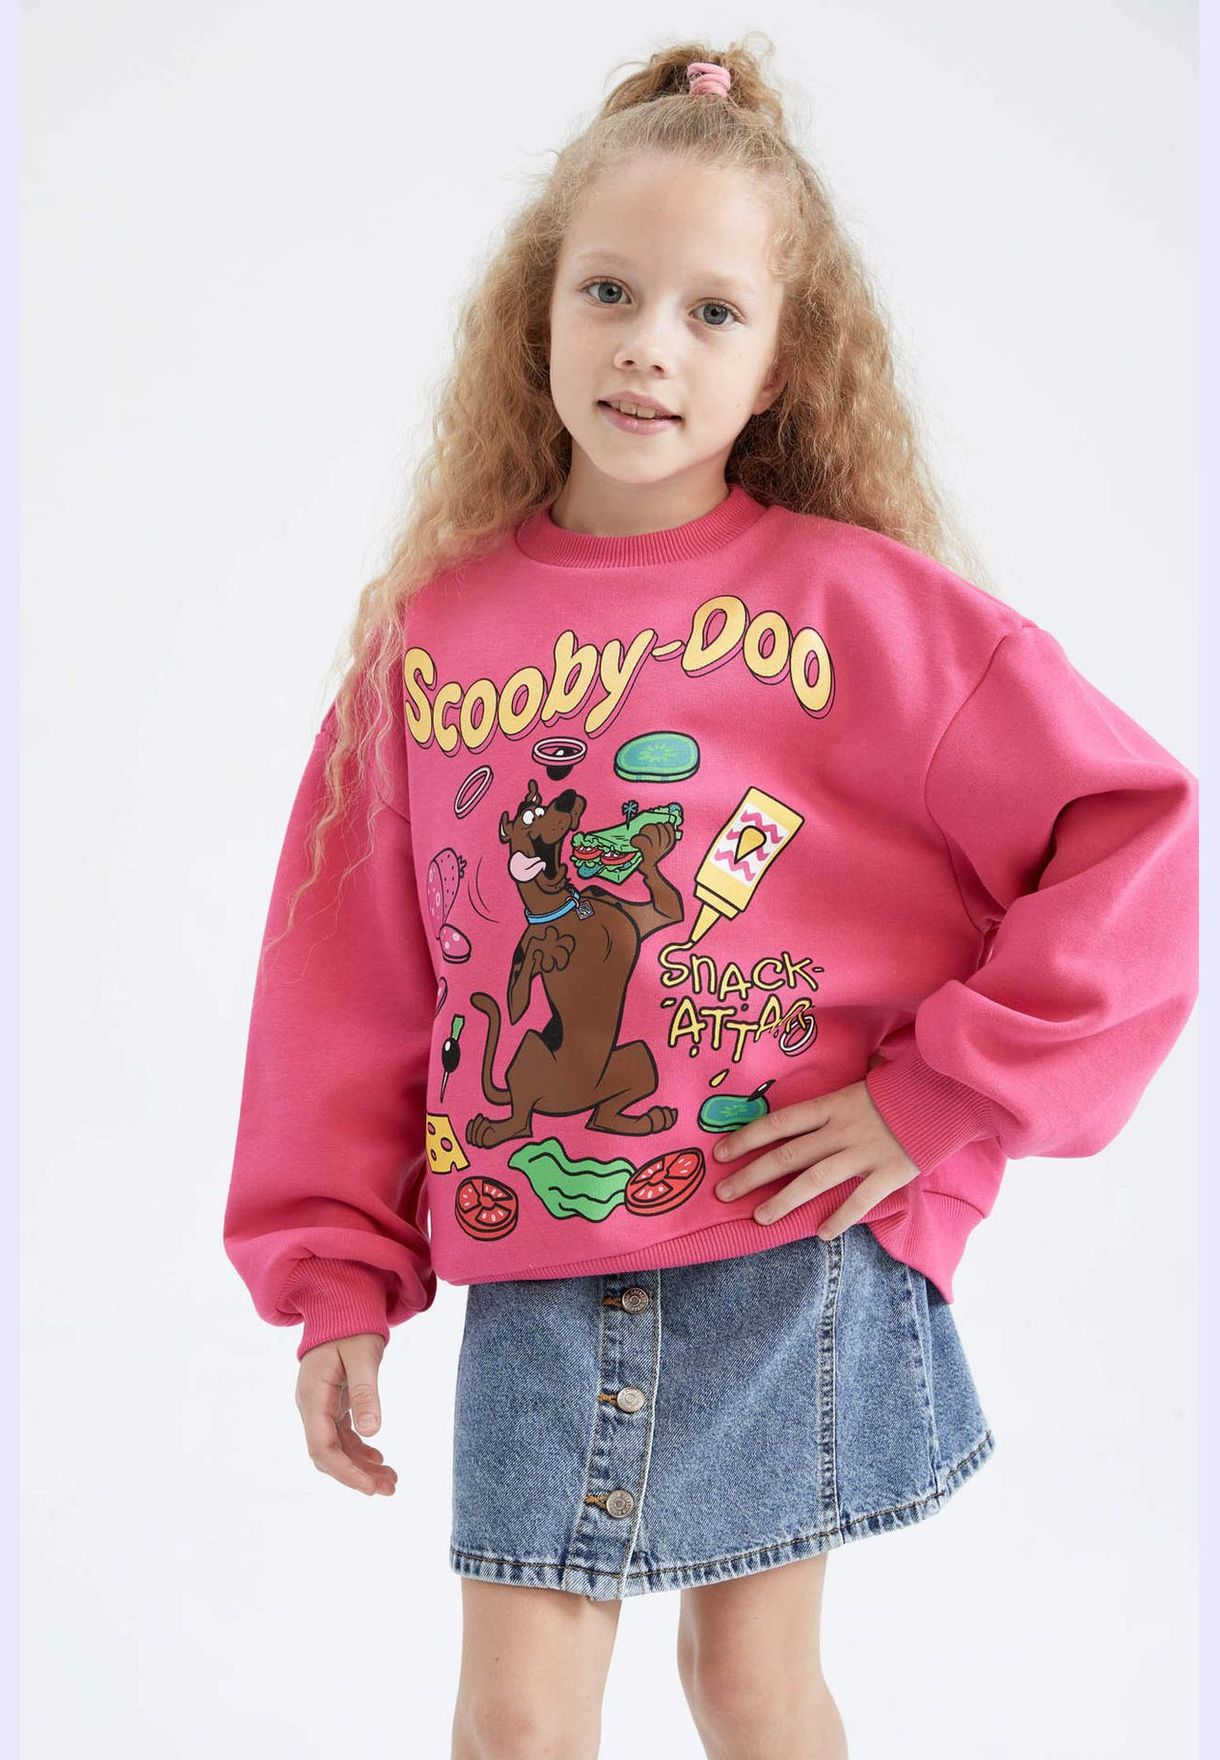 Girl Scooby Doo Licenced Oversize Fit Crew Neck Long Sleeve Knitted Sweatshirt